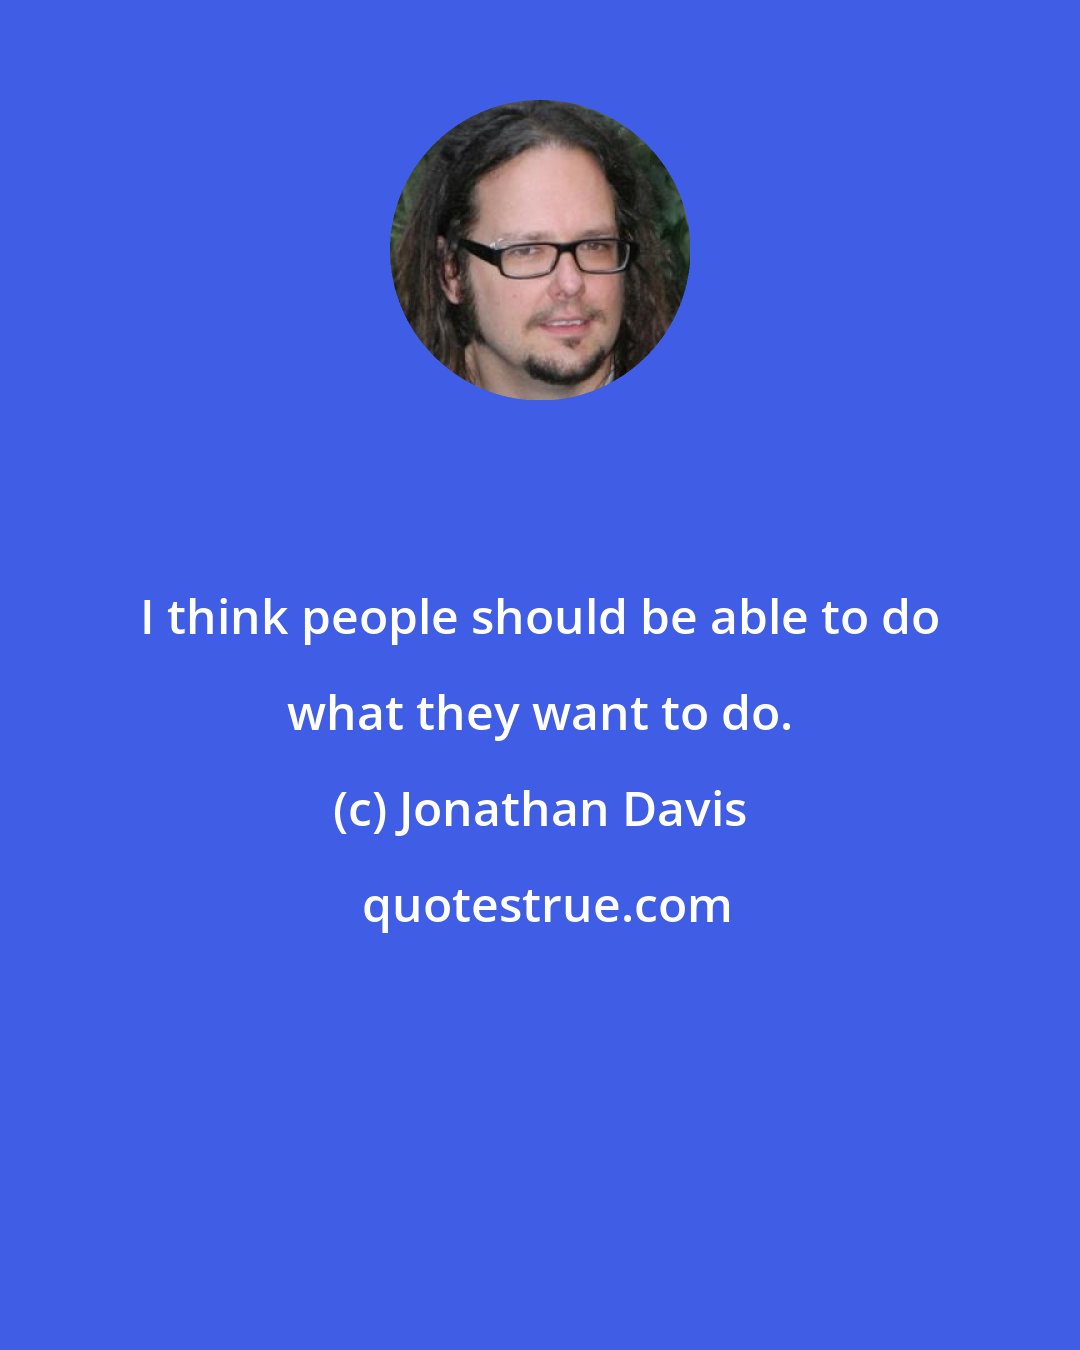 Jonathan Davis: I think people should be able to do what they want to do.